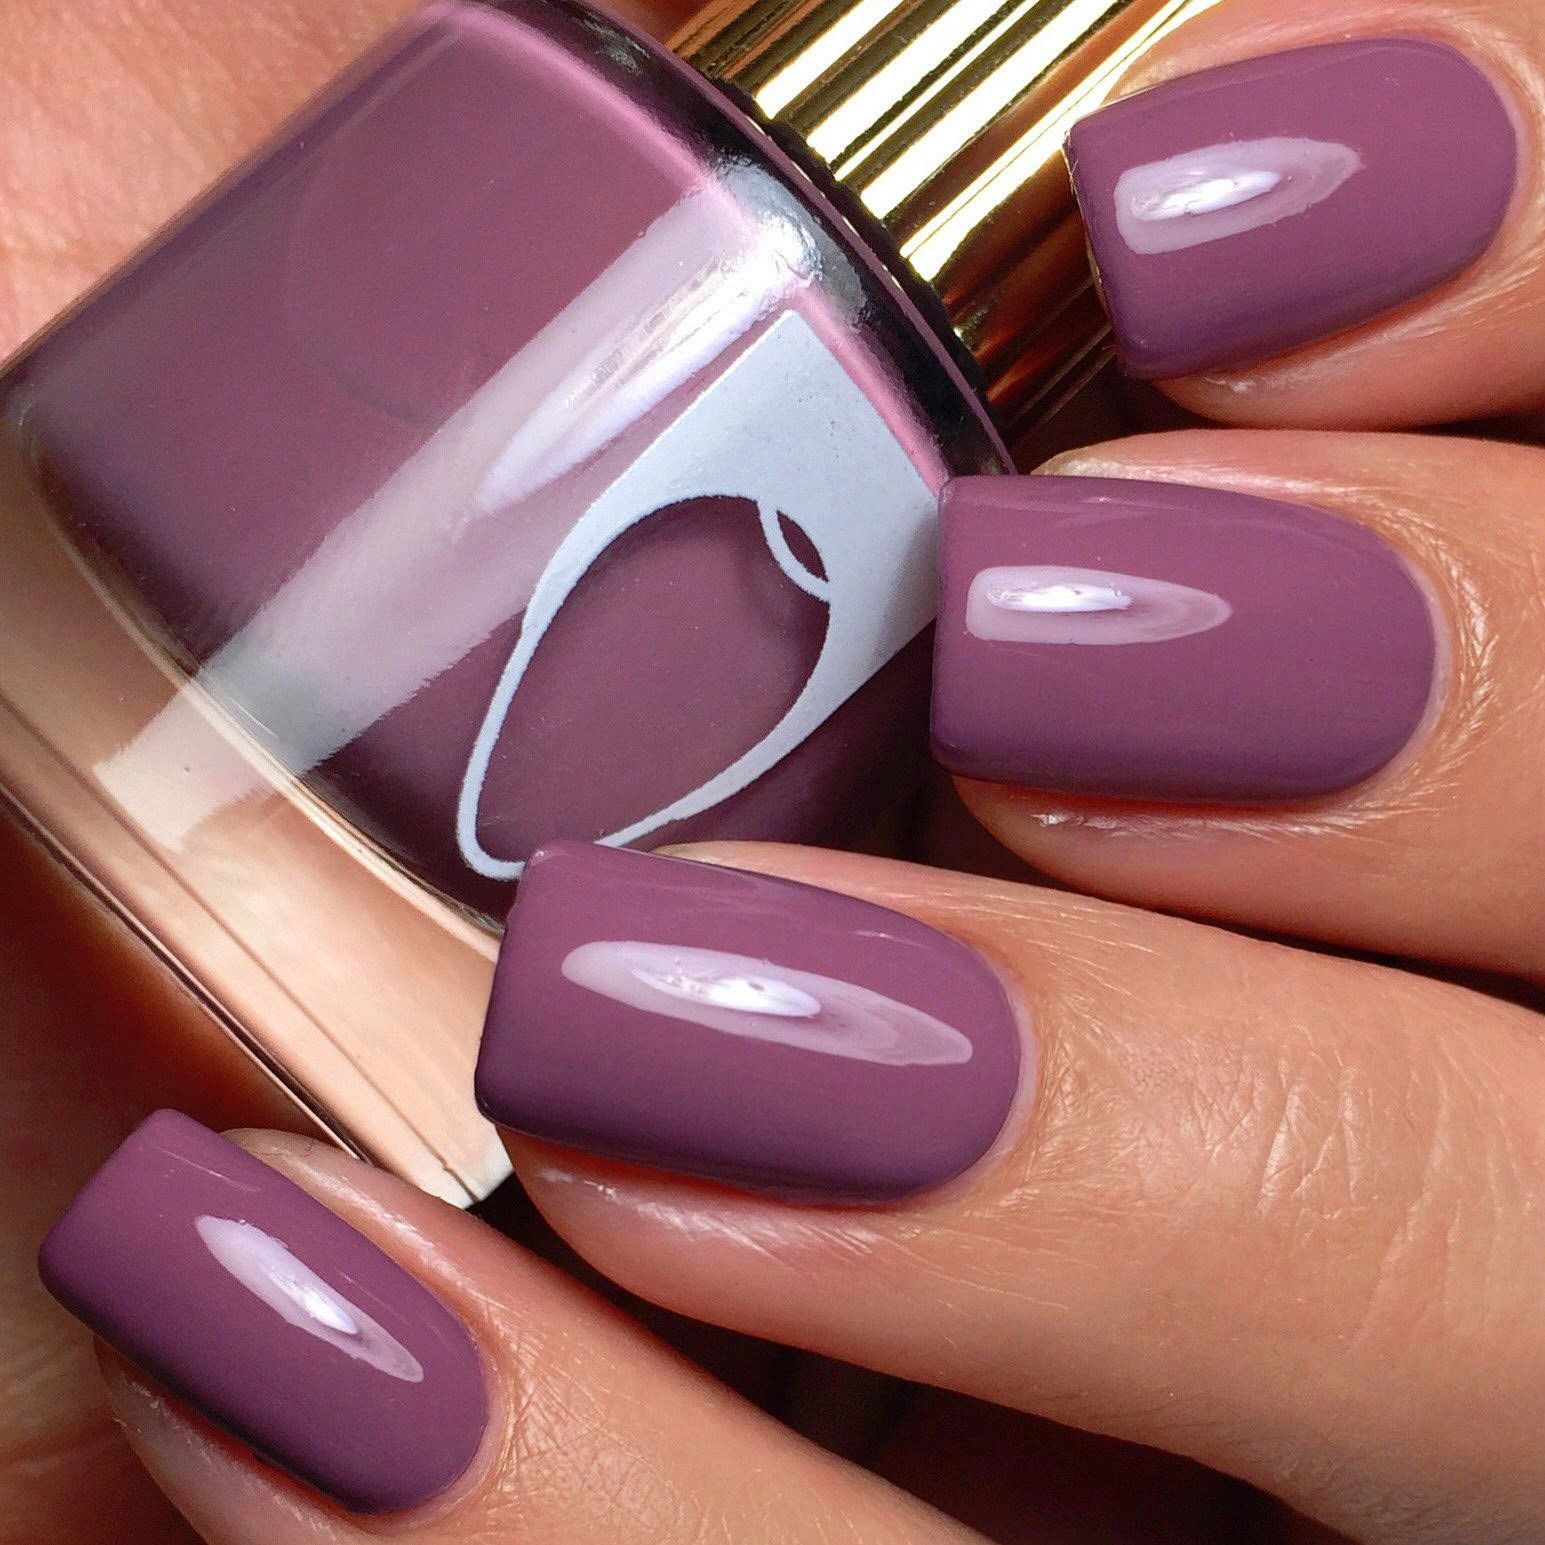 Muted Mauve 2 70+ Most Popular Gel Nail Colors - 12